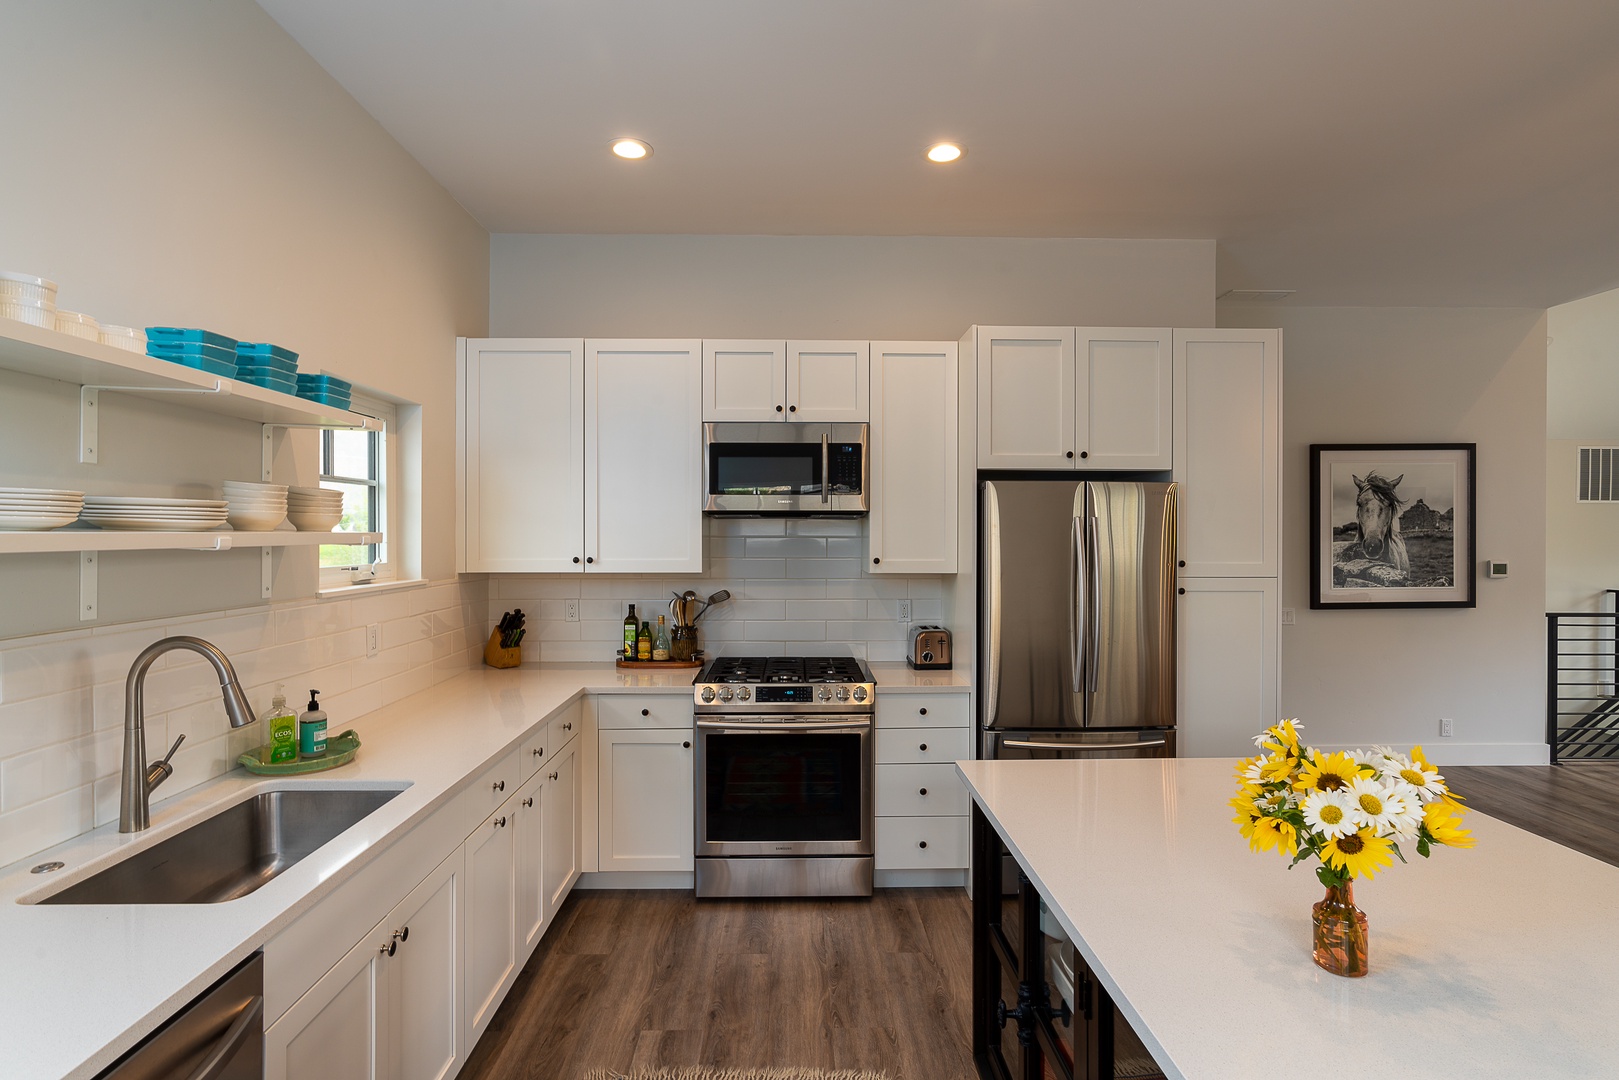 Triumph Vacation Rentals, Contemporary Red Feather Comfort - The bright and modern kitchen is fully equipped and ready for you to prepare your favorite meals